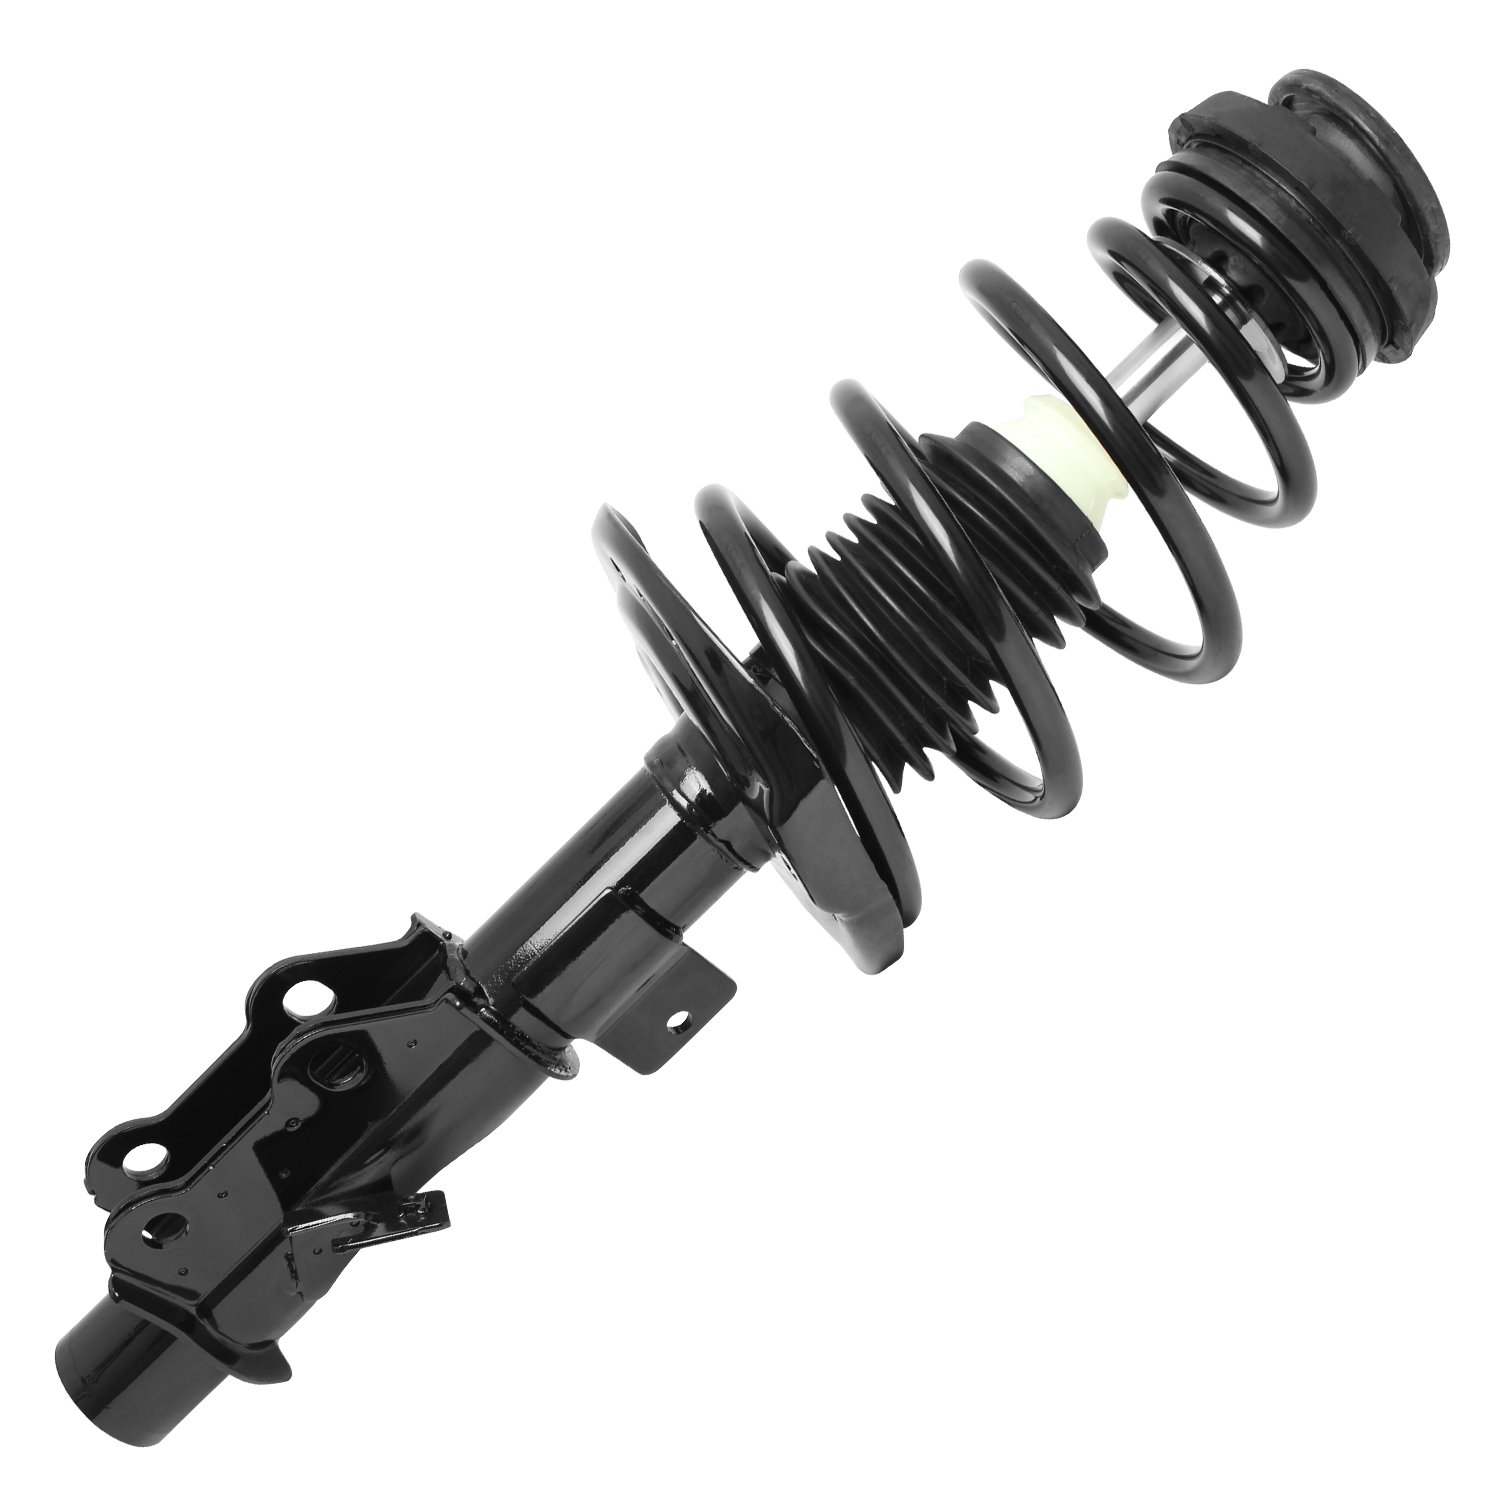 11623 Suspension Strut & Coil Spring Assembly Fits Select Chevy Camaro